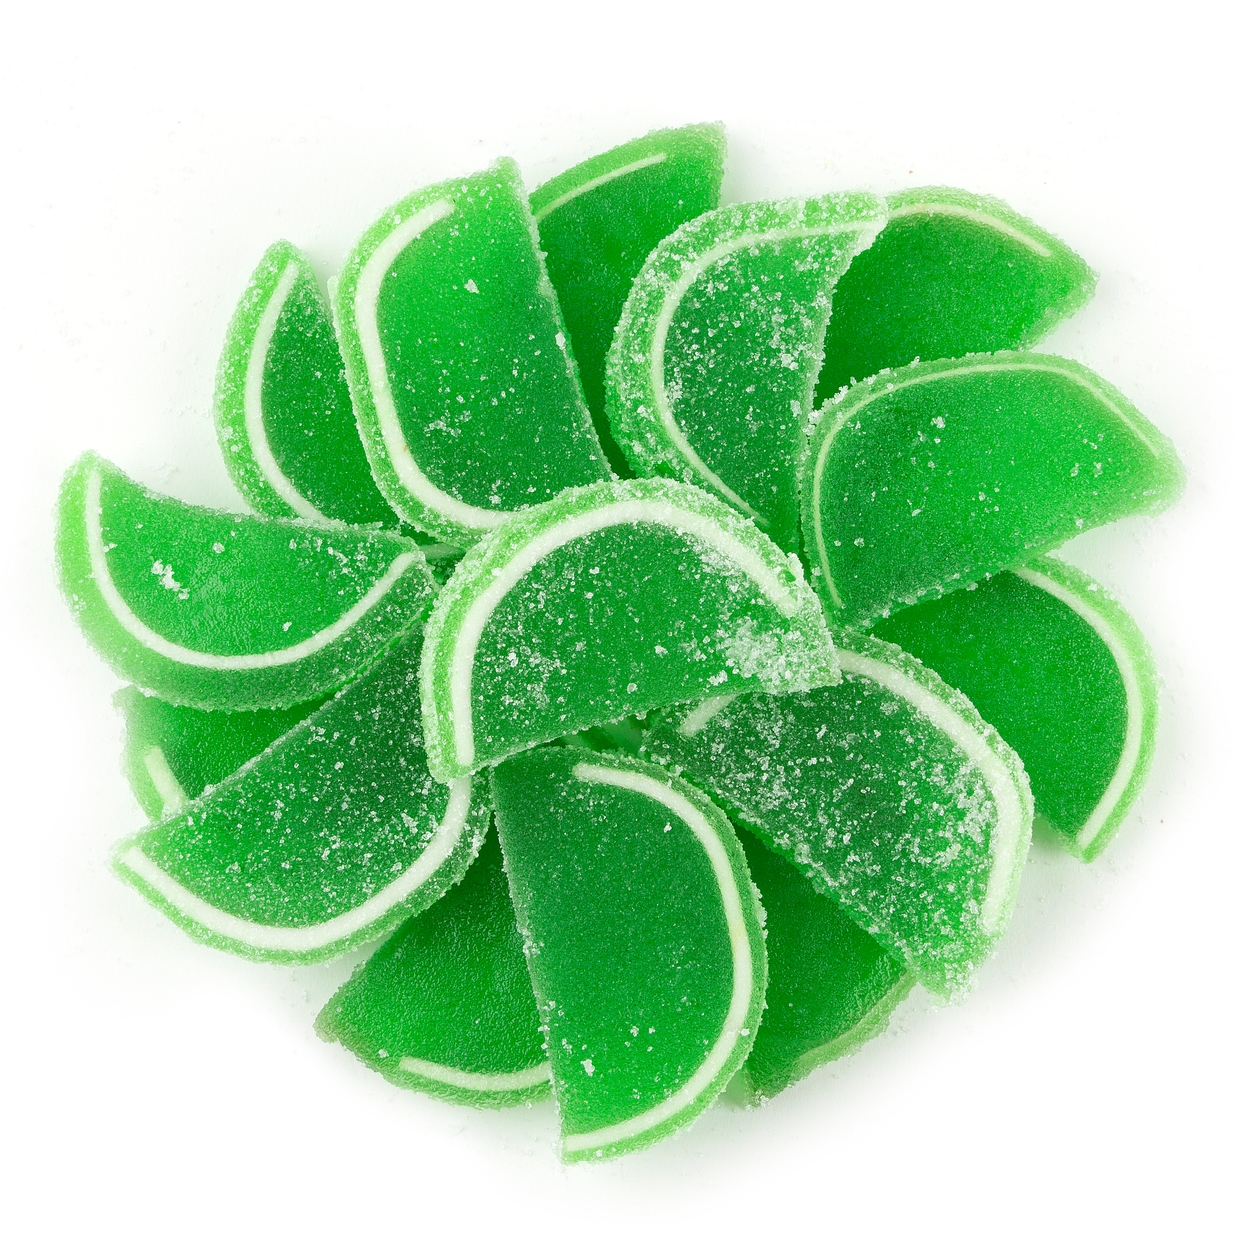 Fruit Slices Lime – Bruce's Candy Kitchen